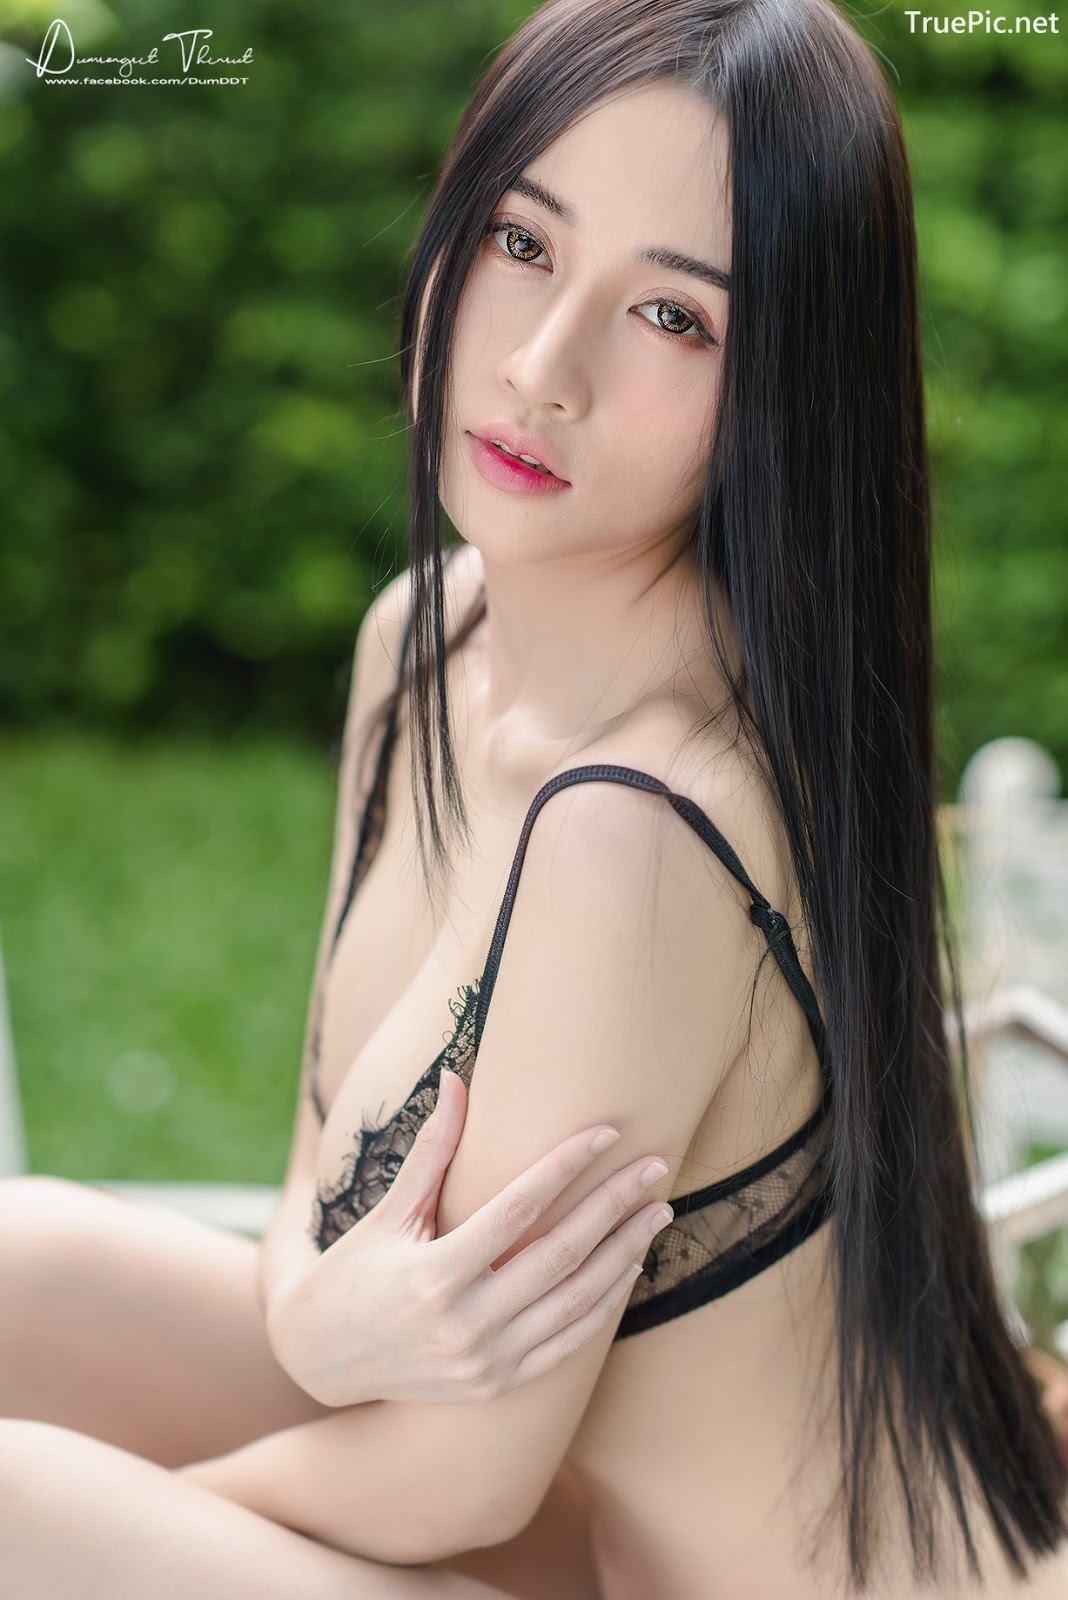 Image Thailand Model - Donutbaby Dlh - PlayBoy Bunny 2019 - TruePic.net - Picture-15